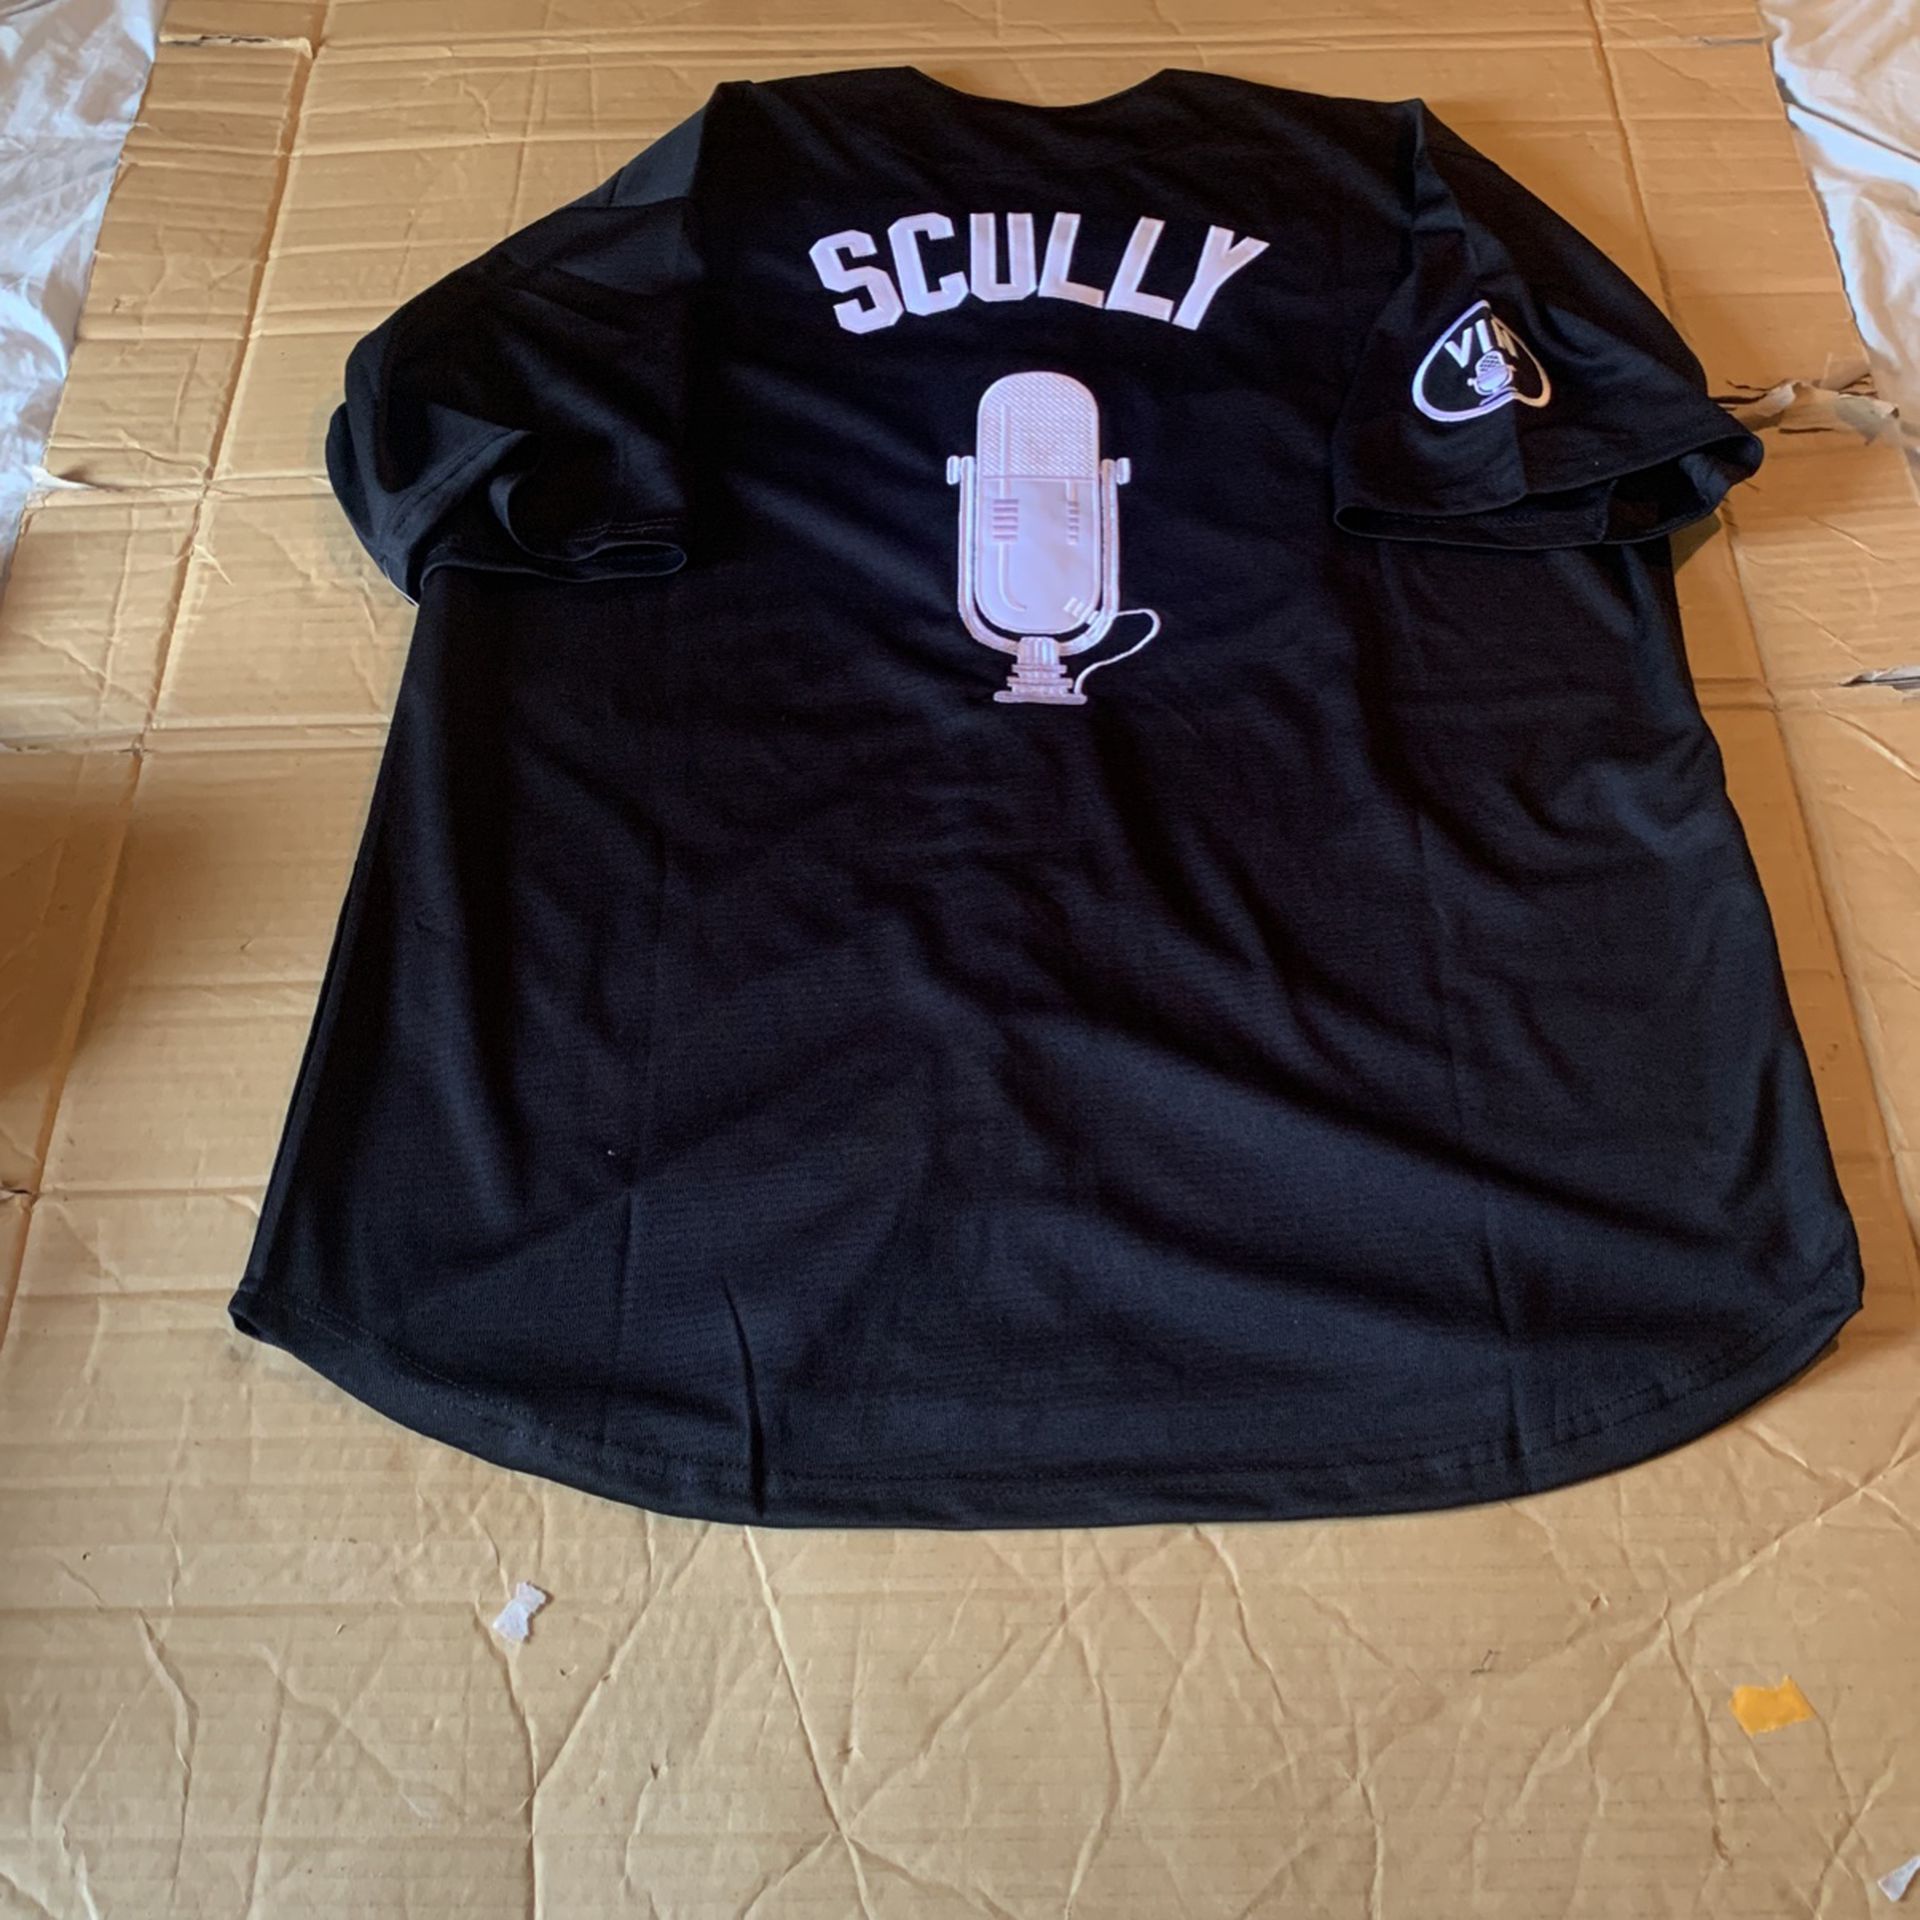 Los Ángeles Dodgers Vin Scully Jersey M, Lg, 3X for Sale in Downey, CA -  OfferUp